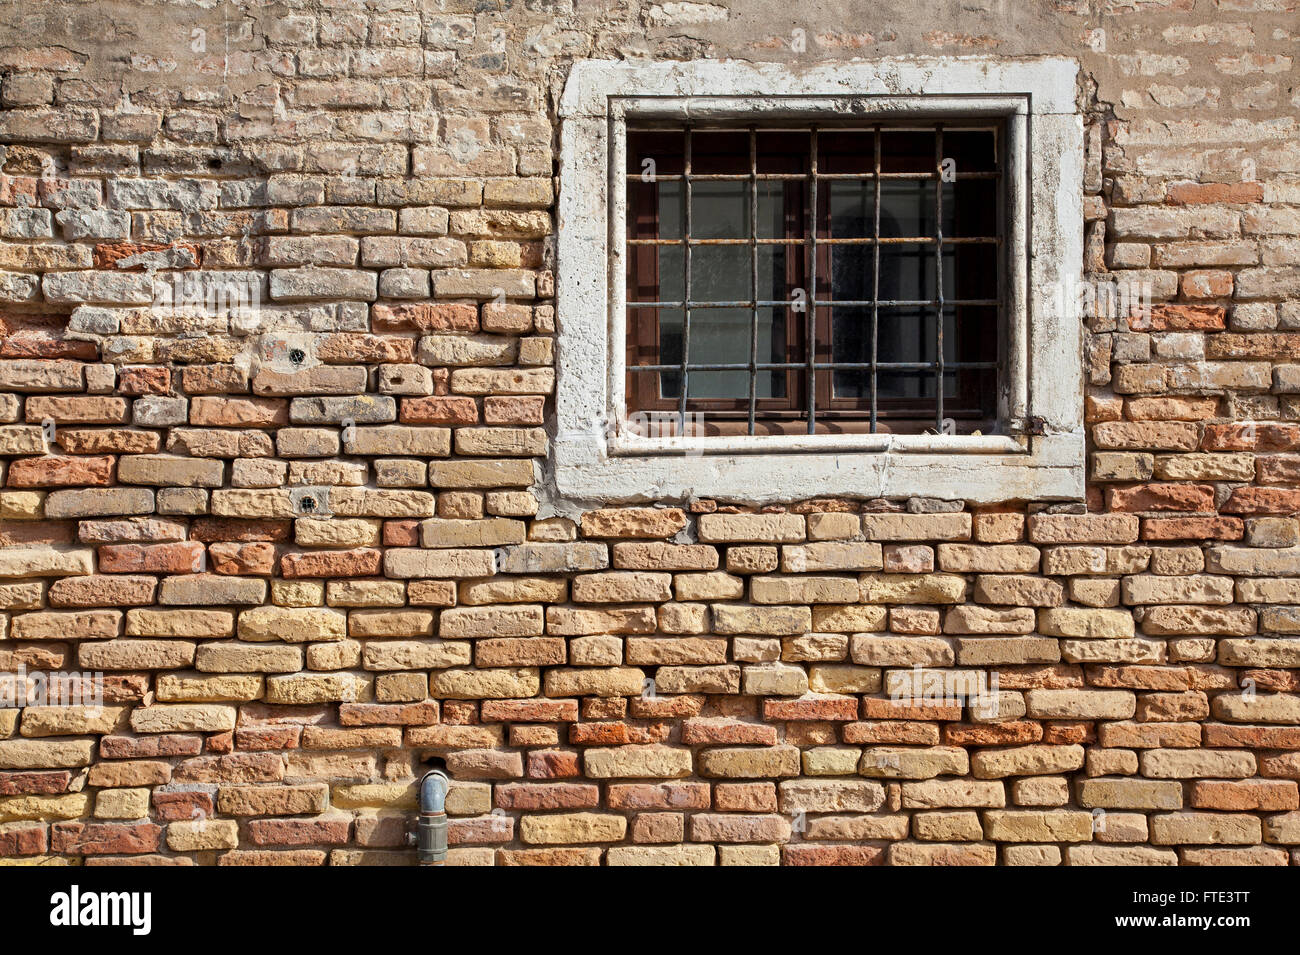 A sunlit barred stone-framed window in a wall of warm coloured crumbling brickwork on Fondamenta Nani, Venice, Italy Stock Photo